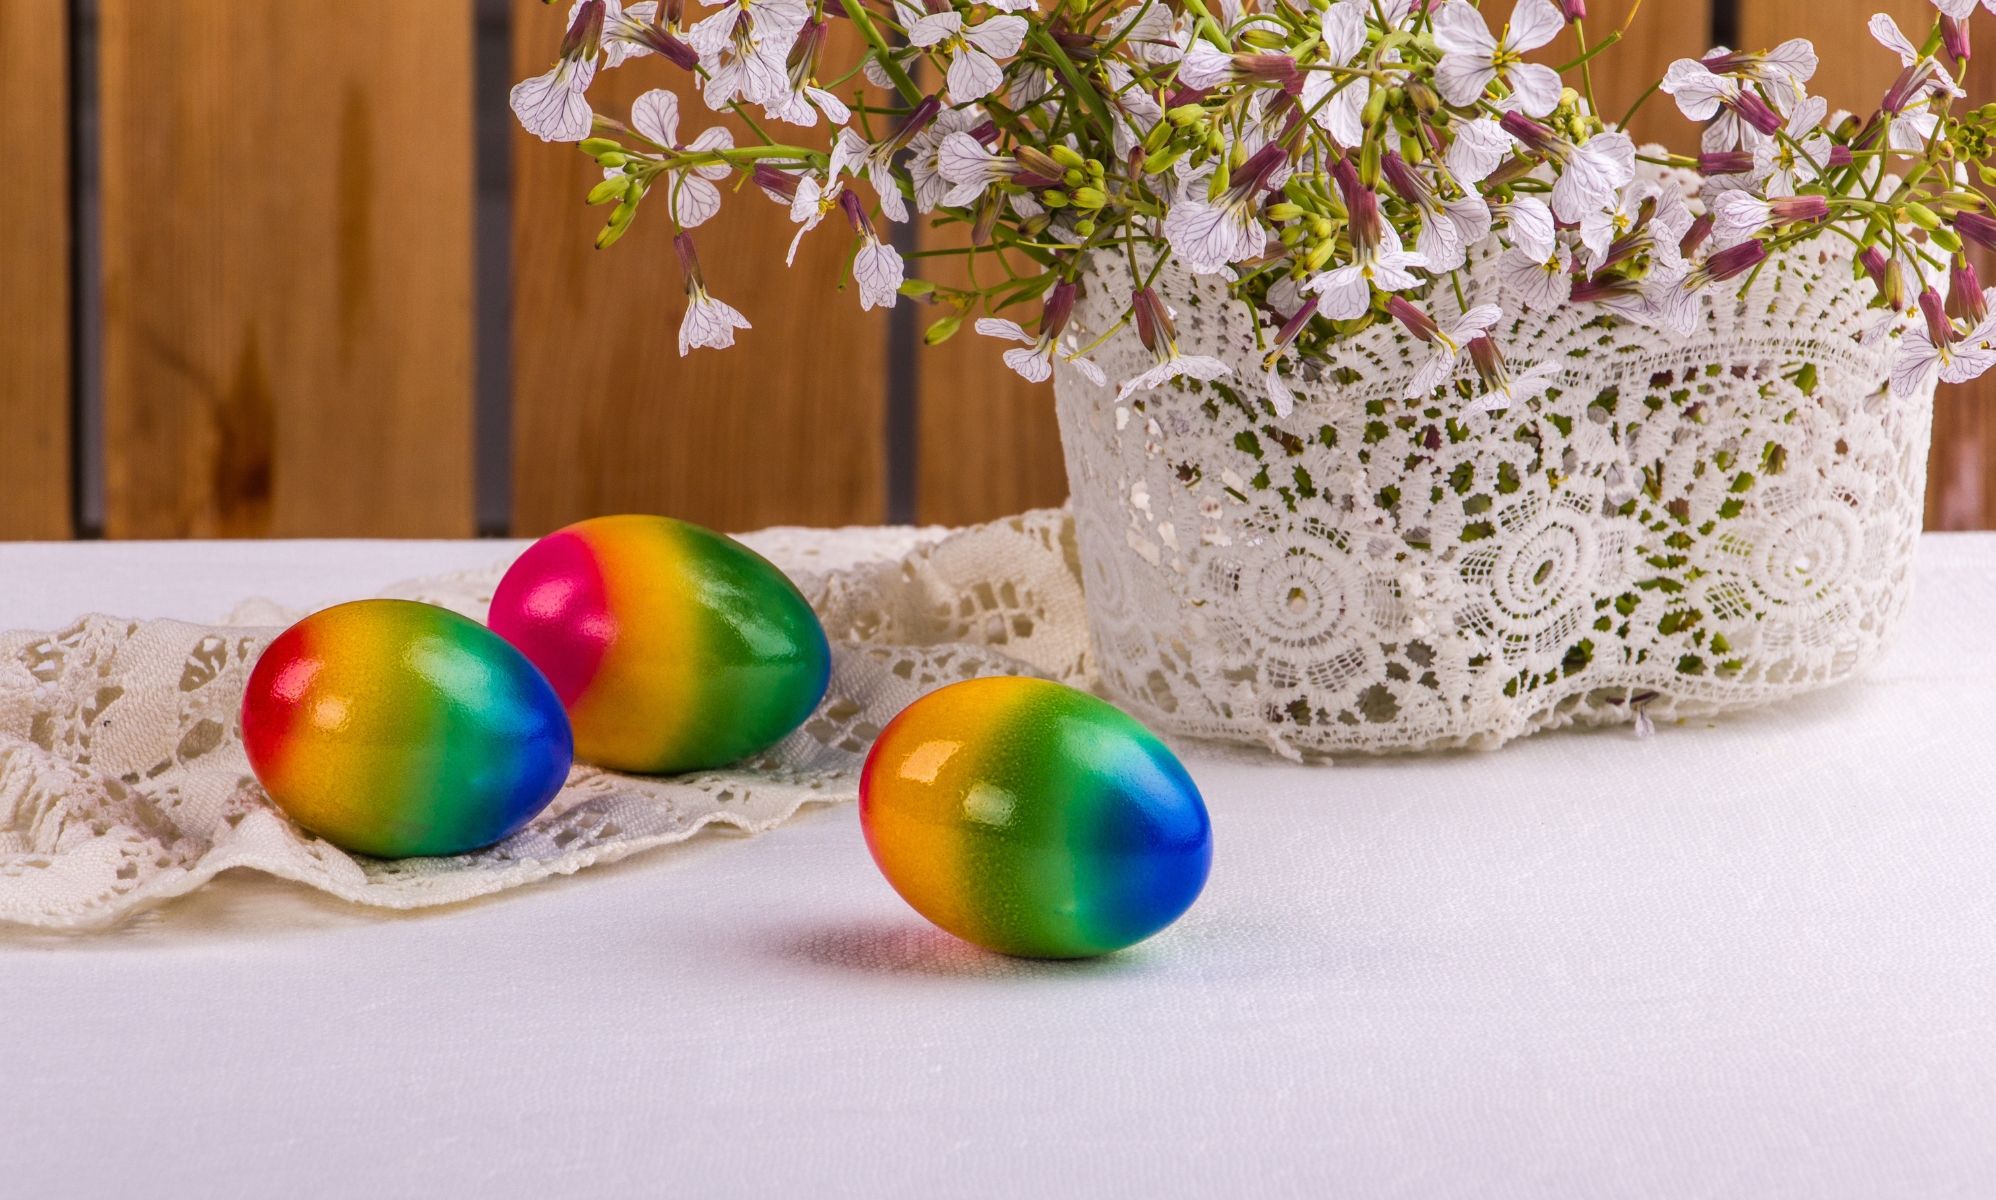 Confused rightwingers accuse trans people of 'hijacking' Easter